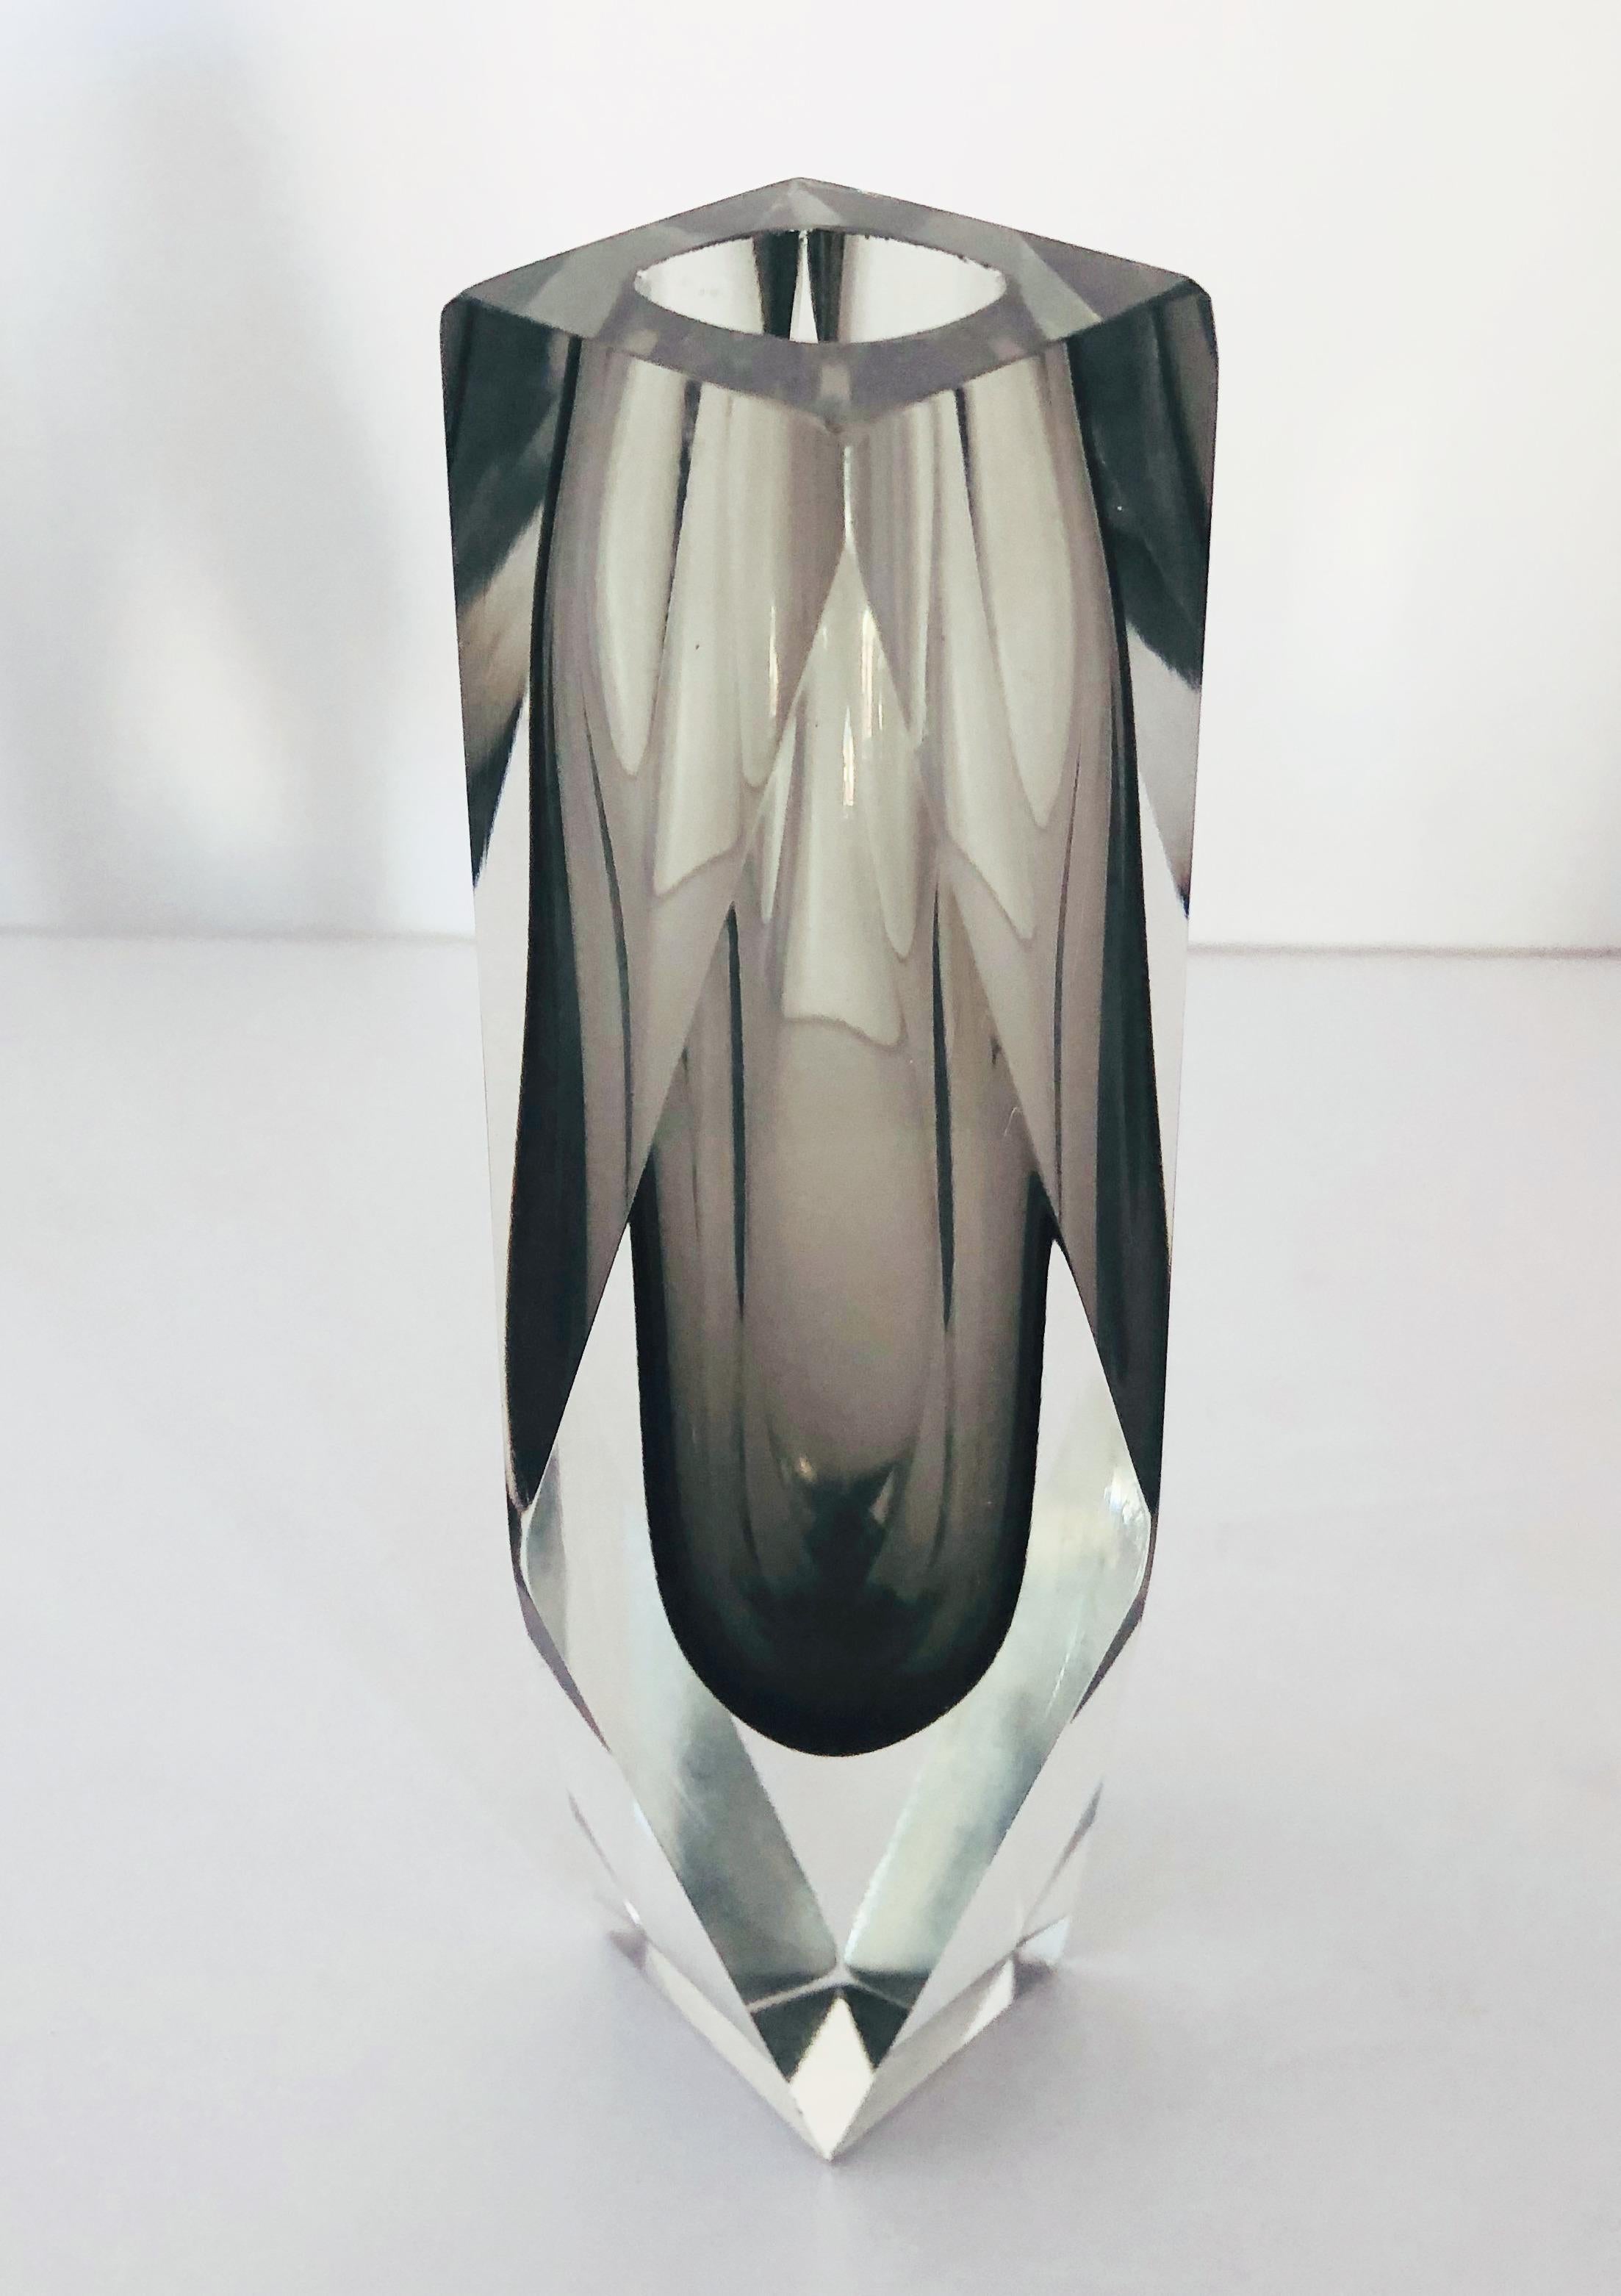 Italian Smoky Faceted Sommerso Vase by Mandruzzato FINAL CLEARANCE SALE